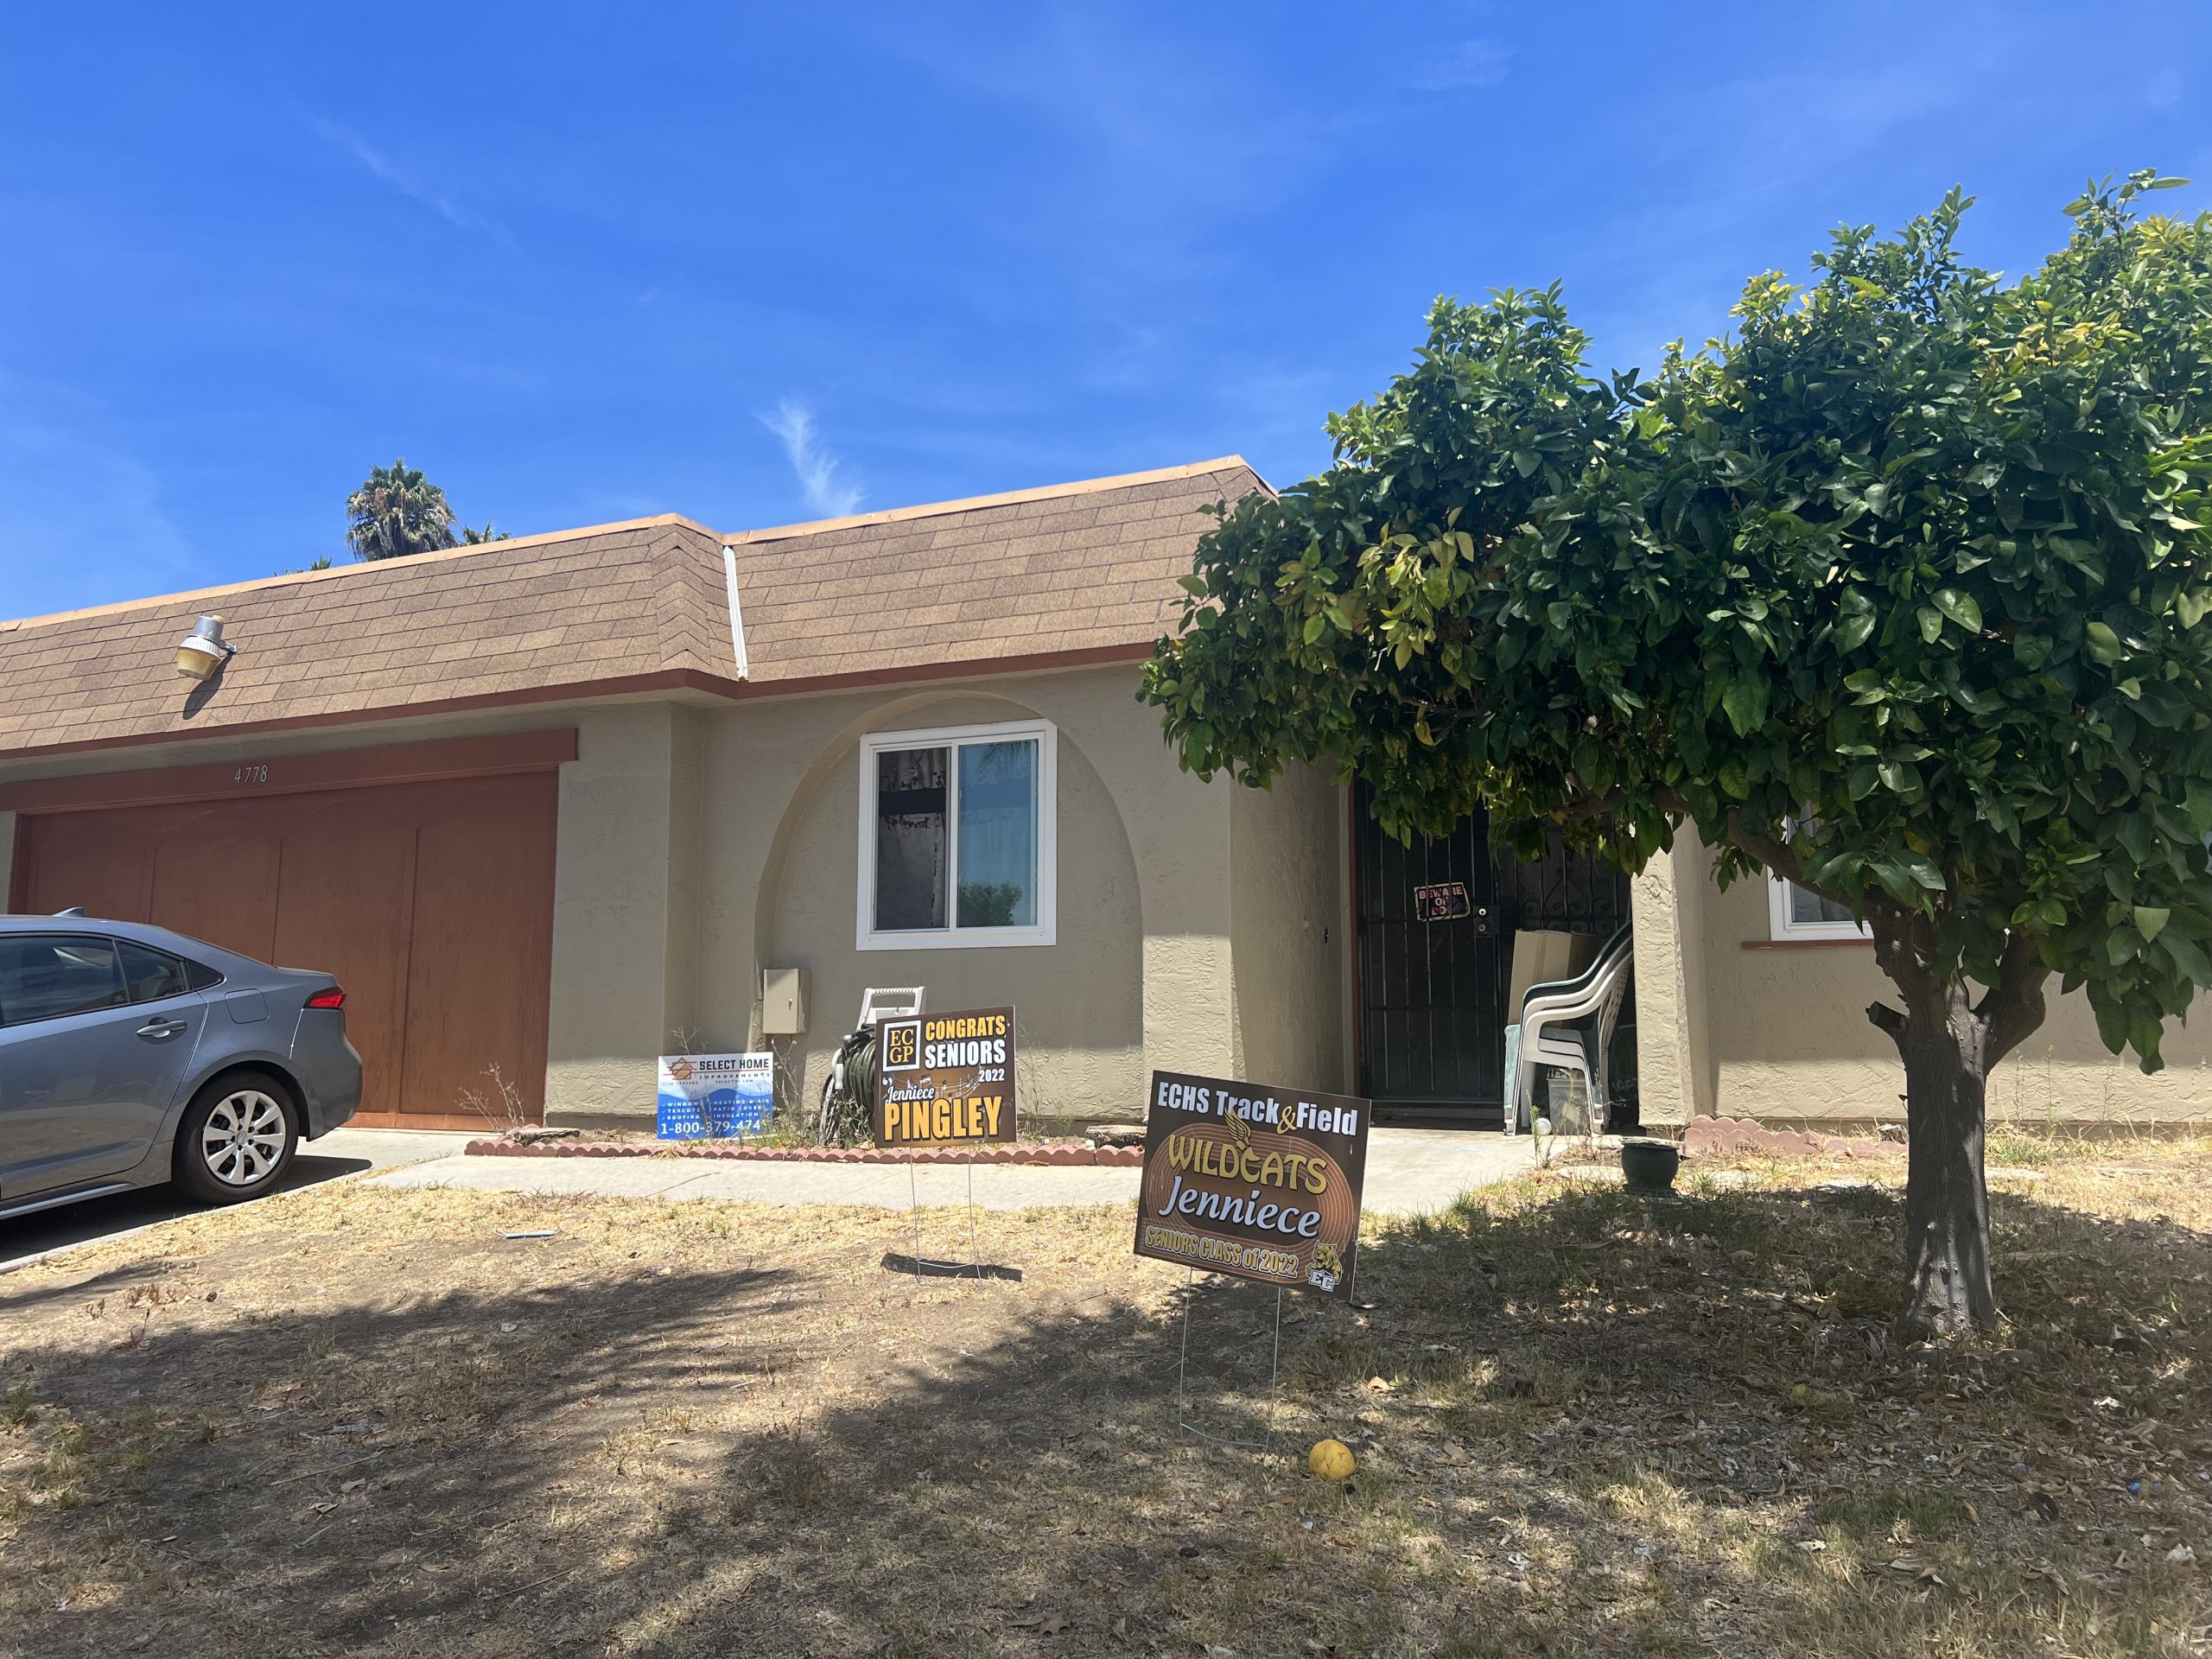 SuperCote Exterior Coating Project in Oceanside, CA